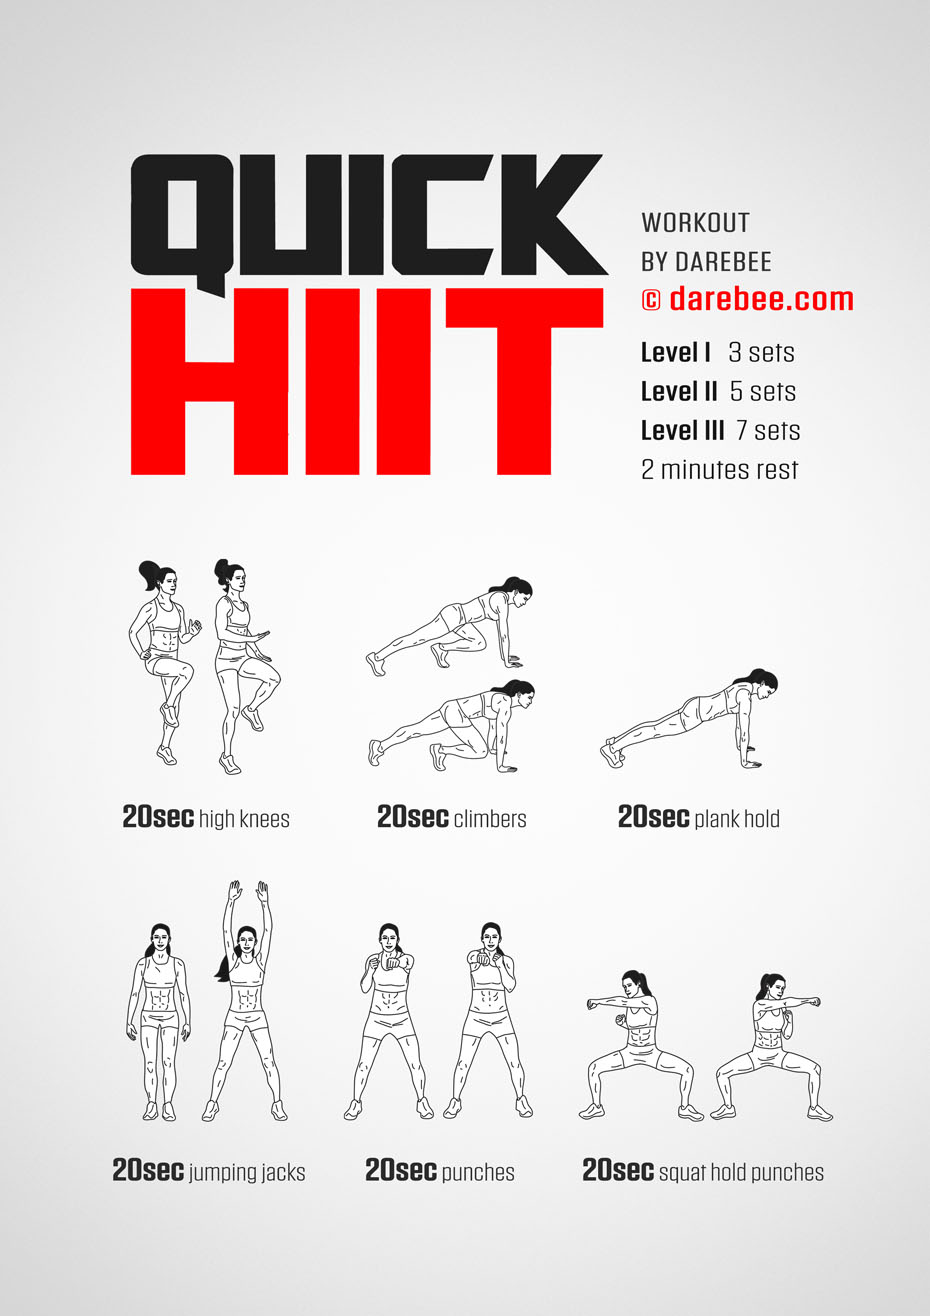 15 Minute Hiit Workout Means for Gym